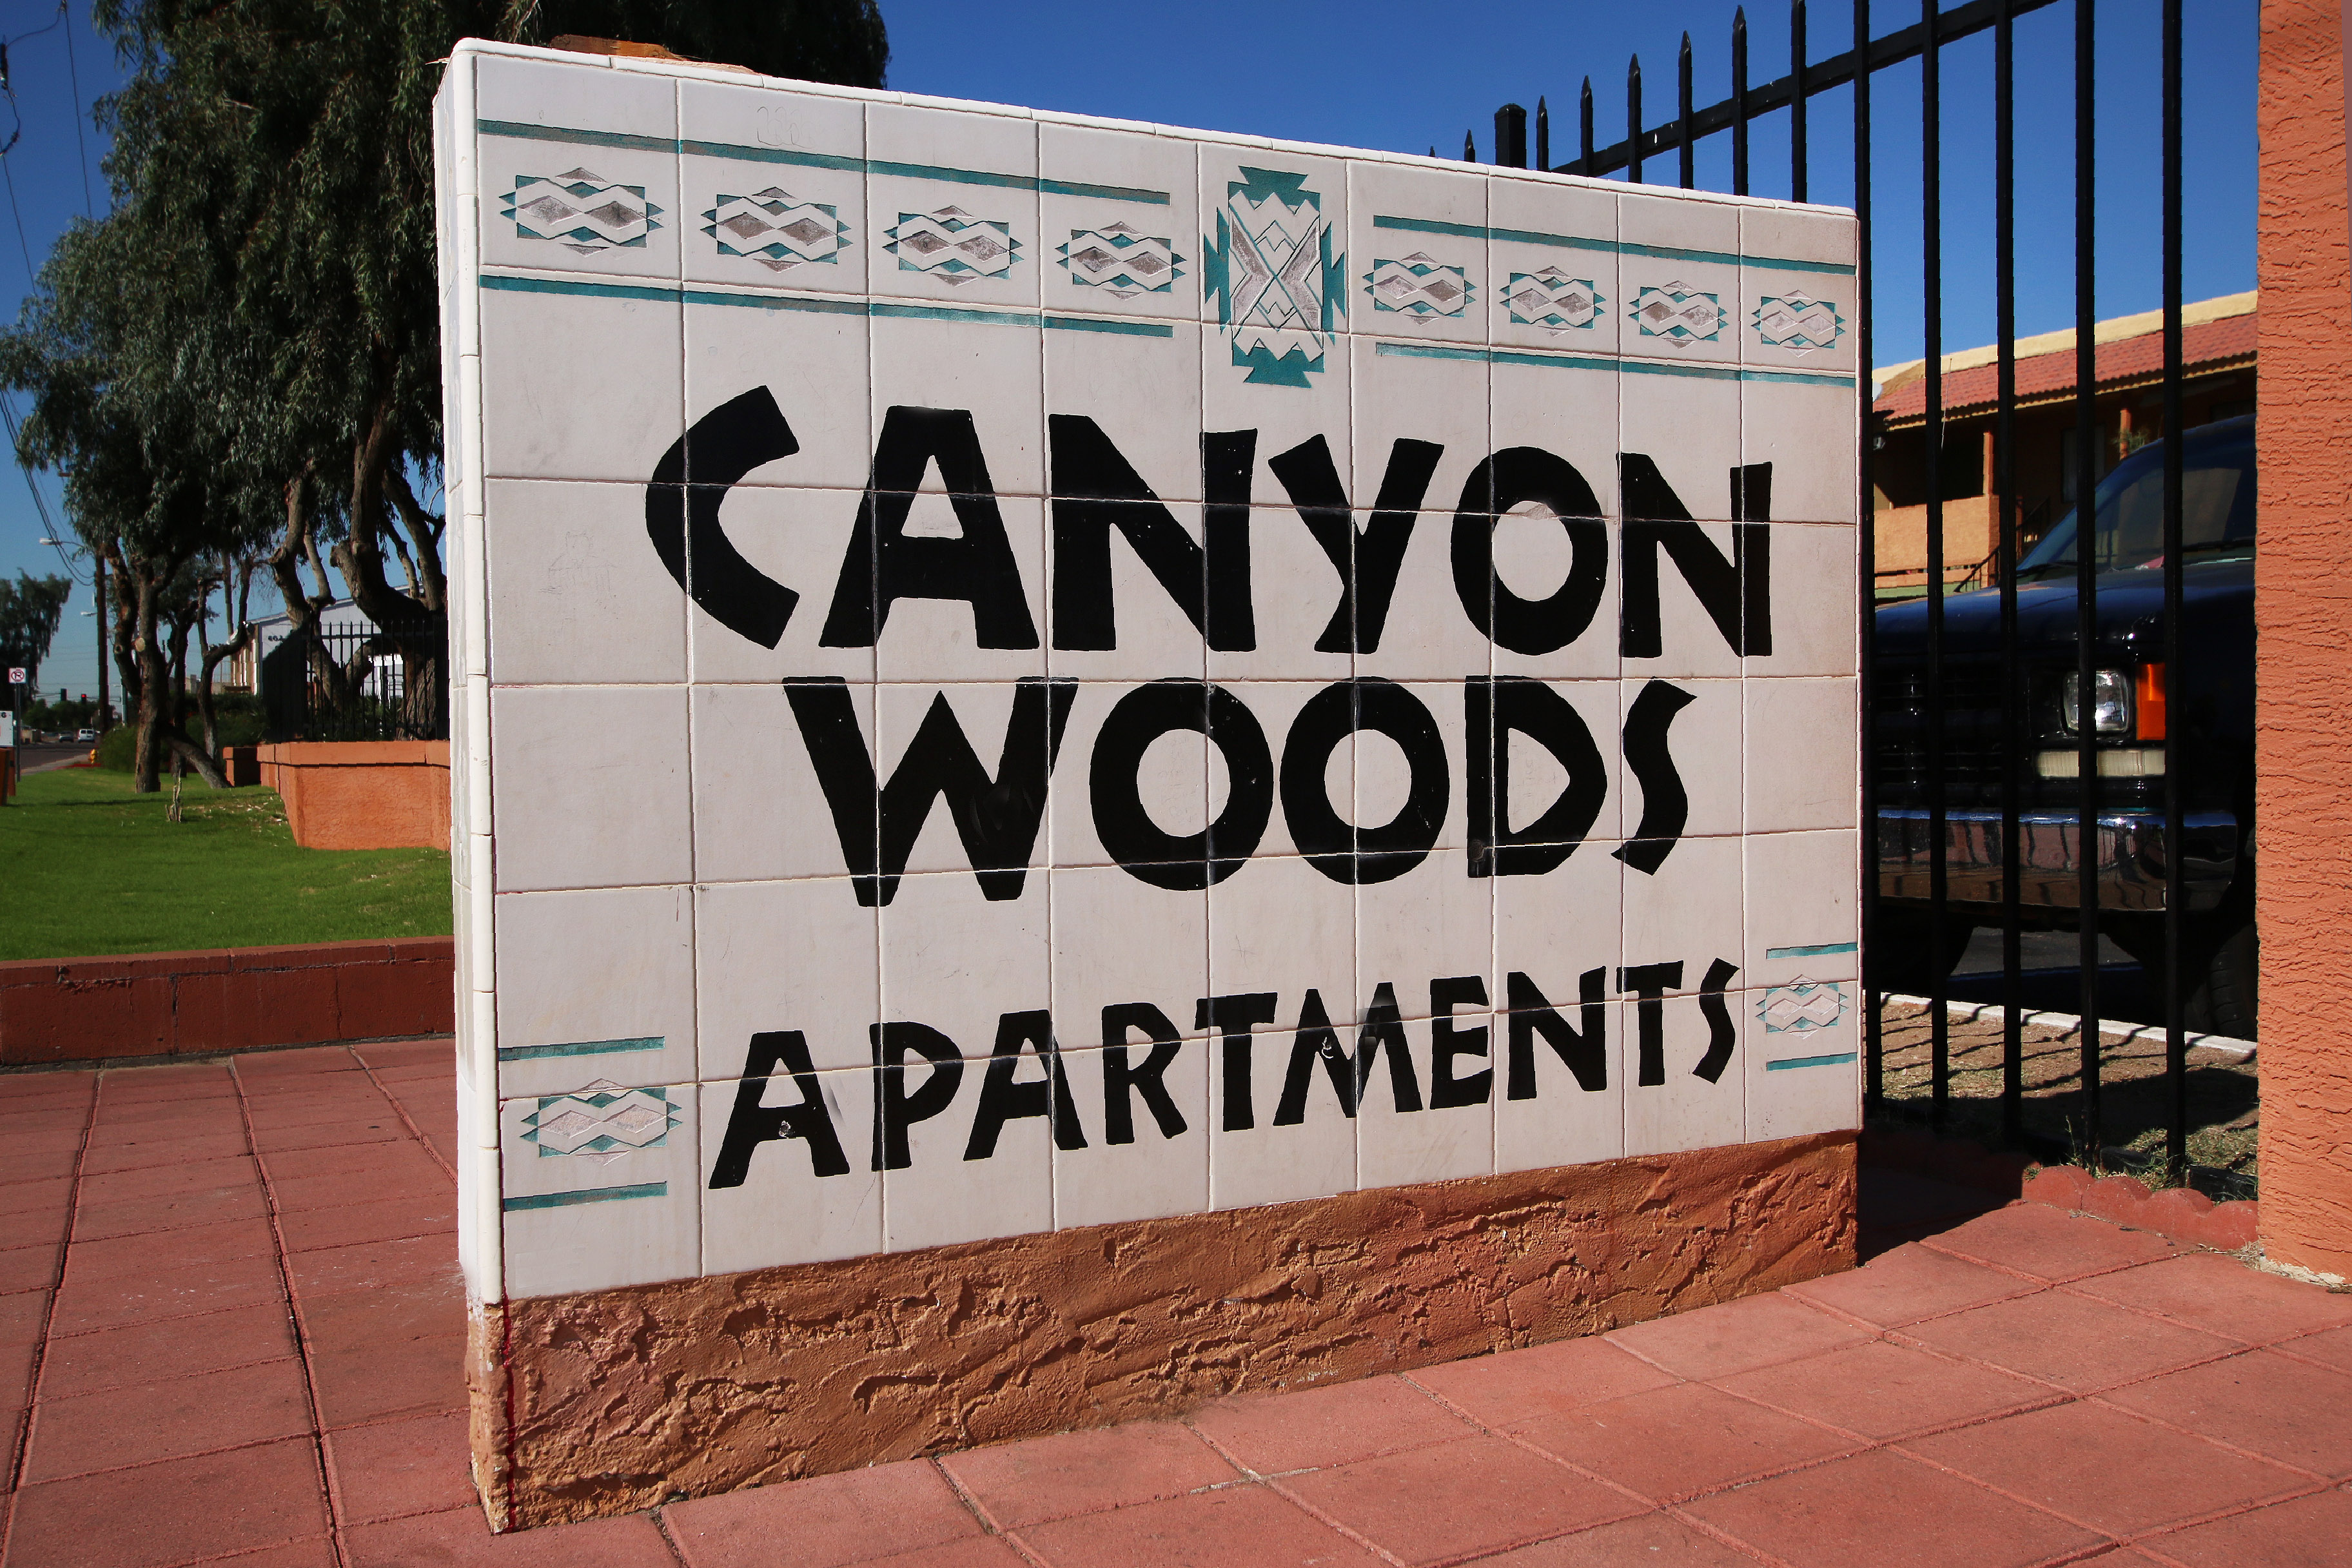 Canyon Woods Apartments